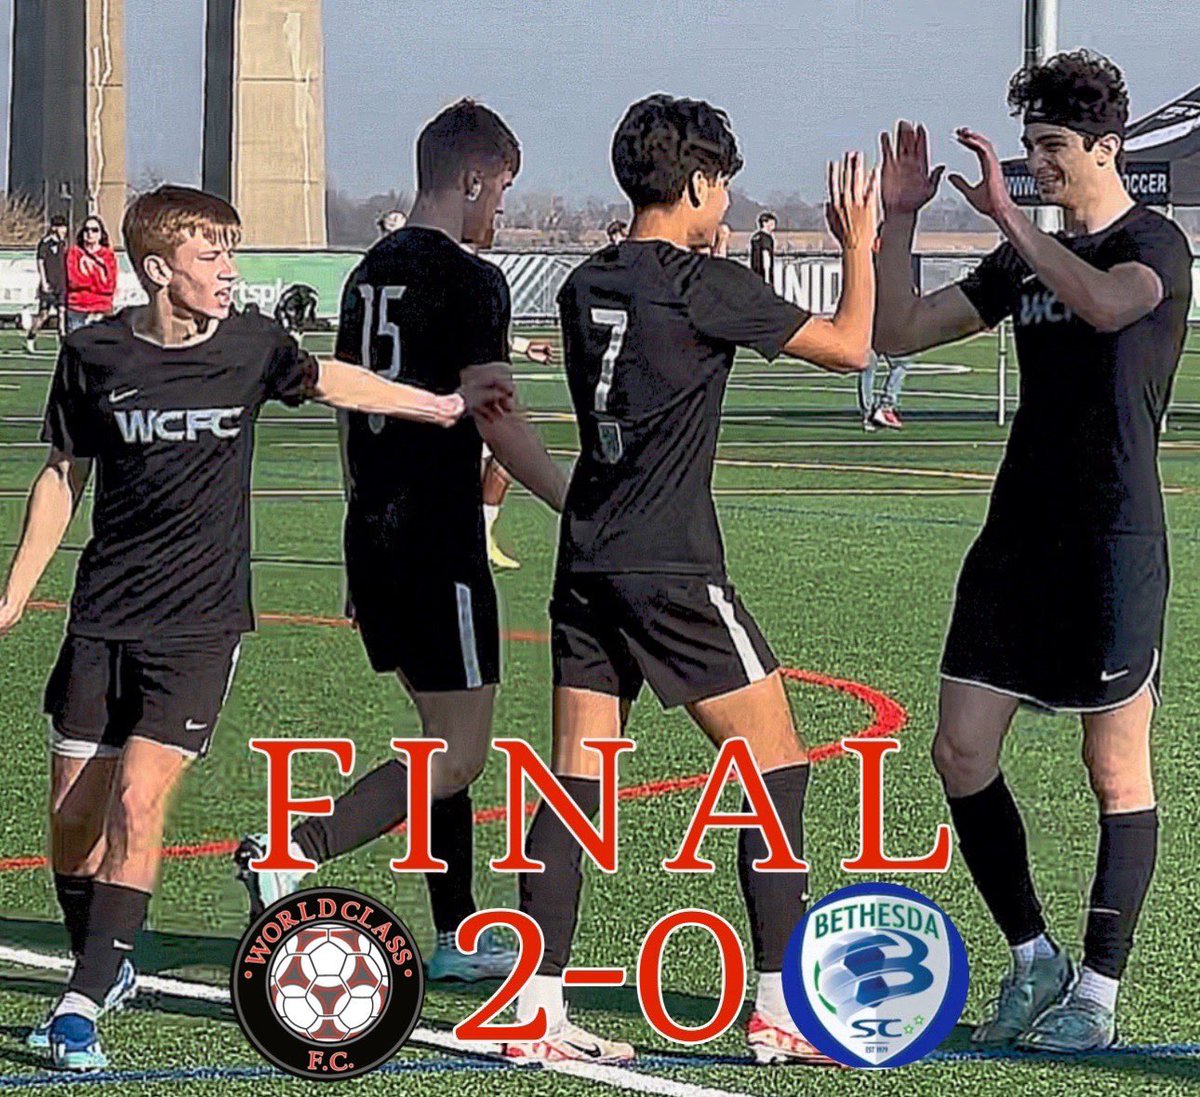 Starting off the Best of the East Cup in great fashion with a 2-0 win over Bethesda (MD) u19 MLS next down at Subaru Soccer Park in Chester, PA! @WorldClassFC1 @ECNLboys @NcsaSoccer @ncsa @TappanZeeSoccer